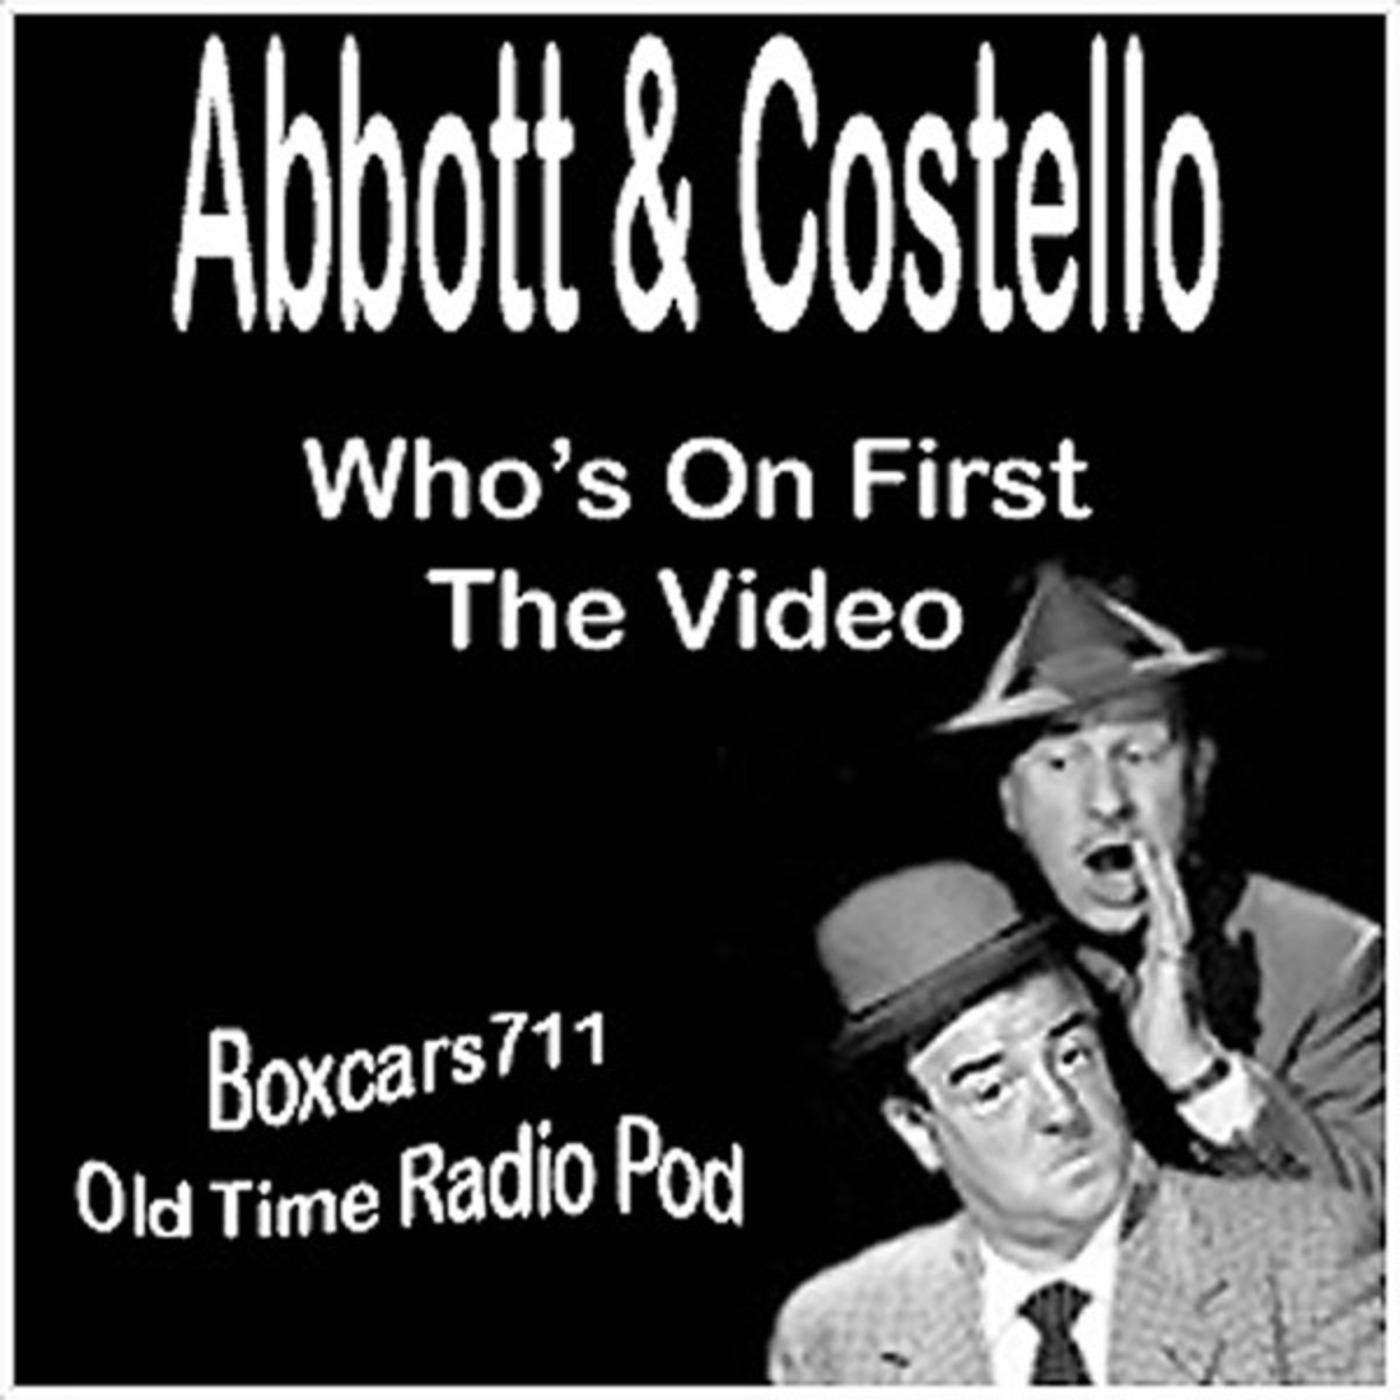 Episode 9635: Who's On First - Abbott & Costello (The Video) 1938